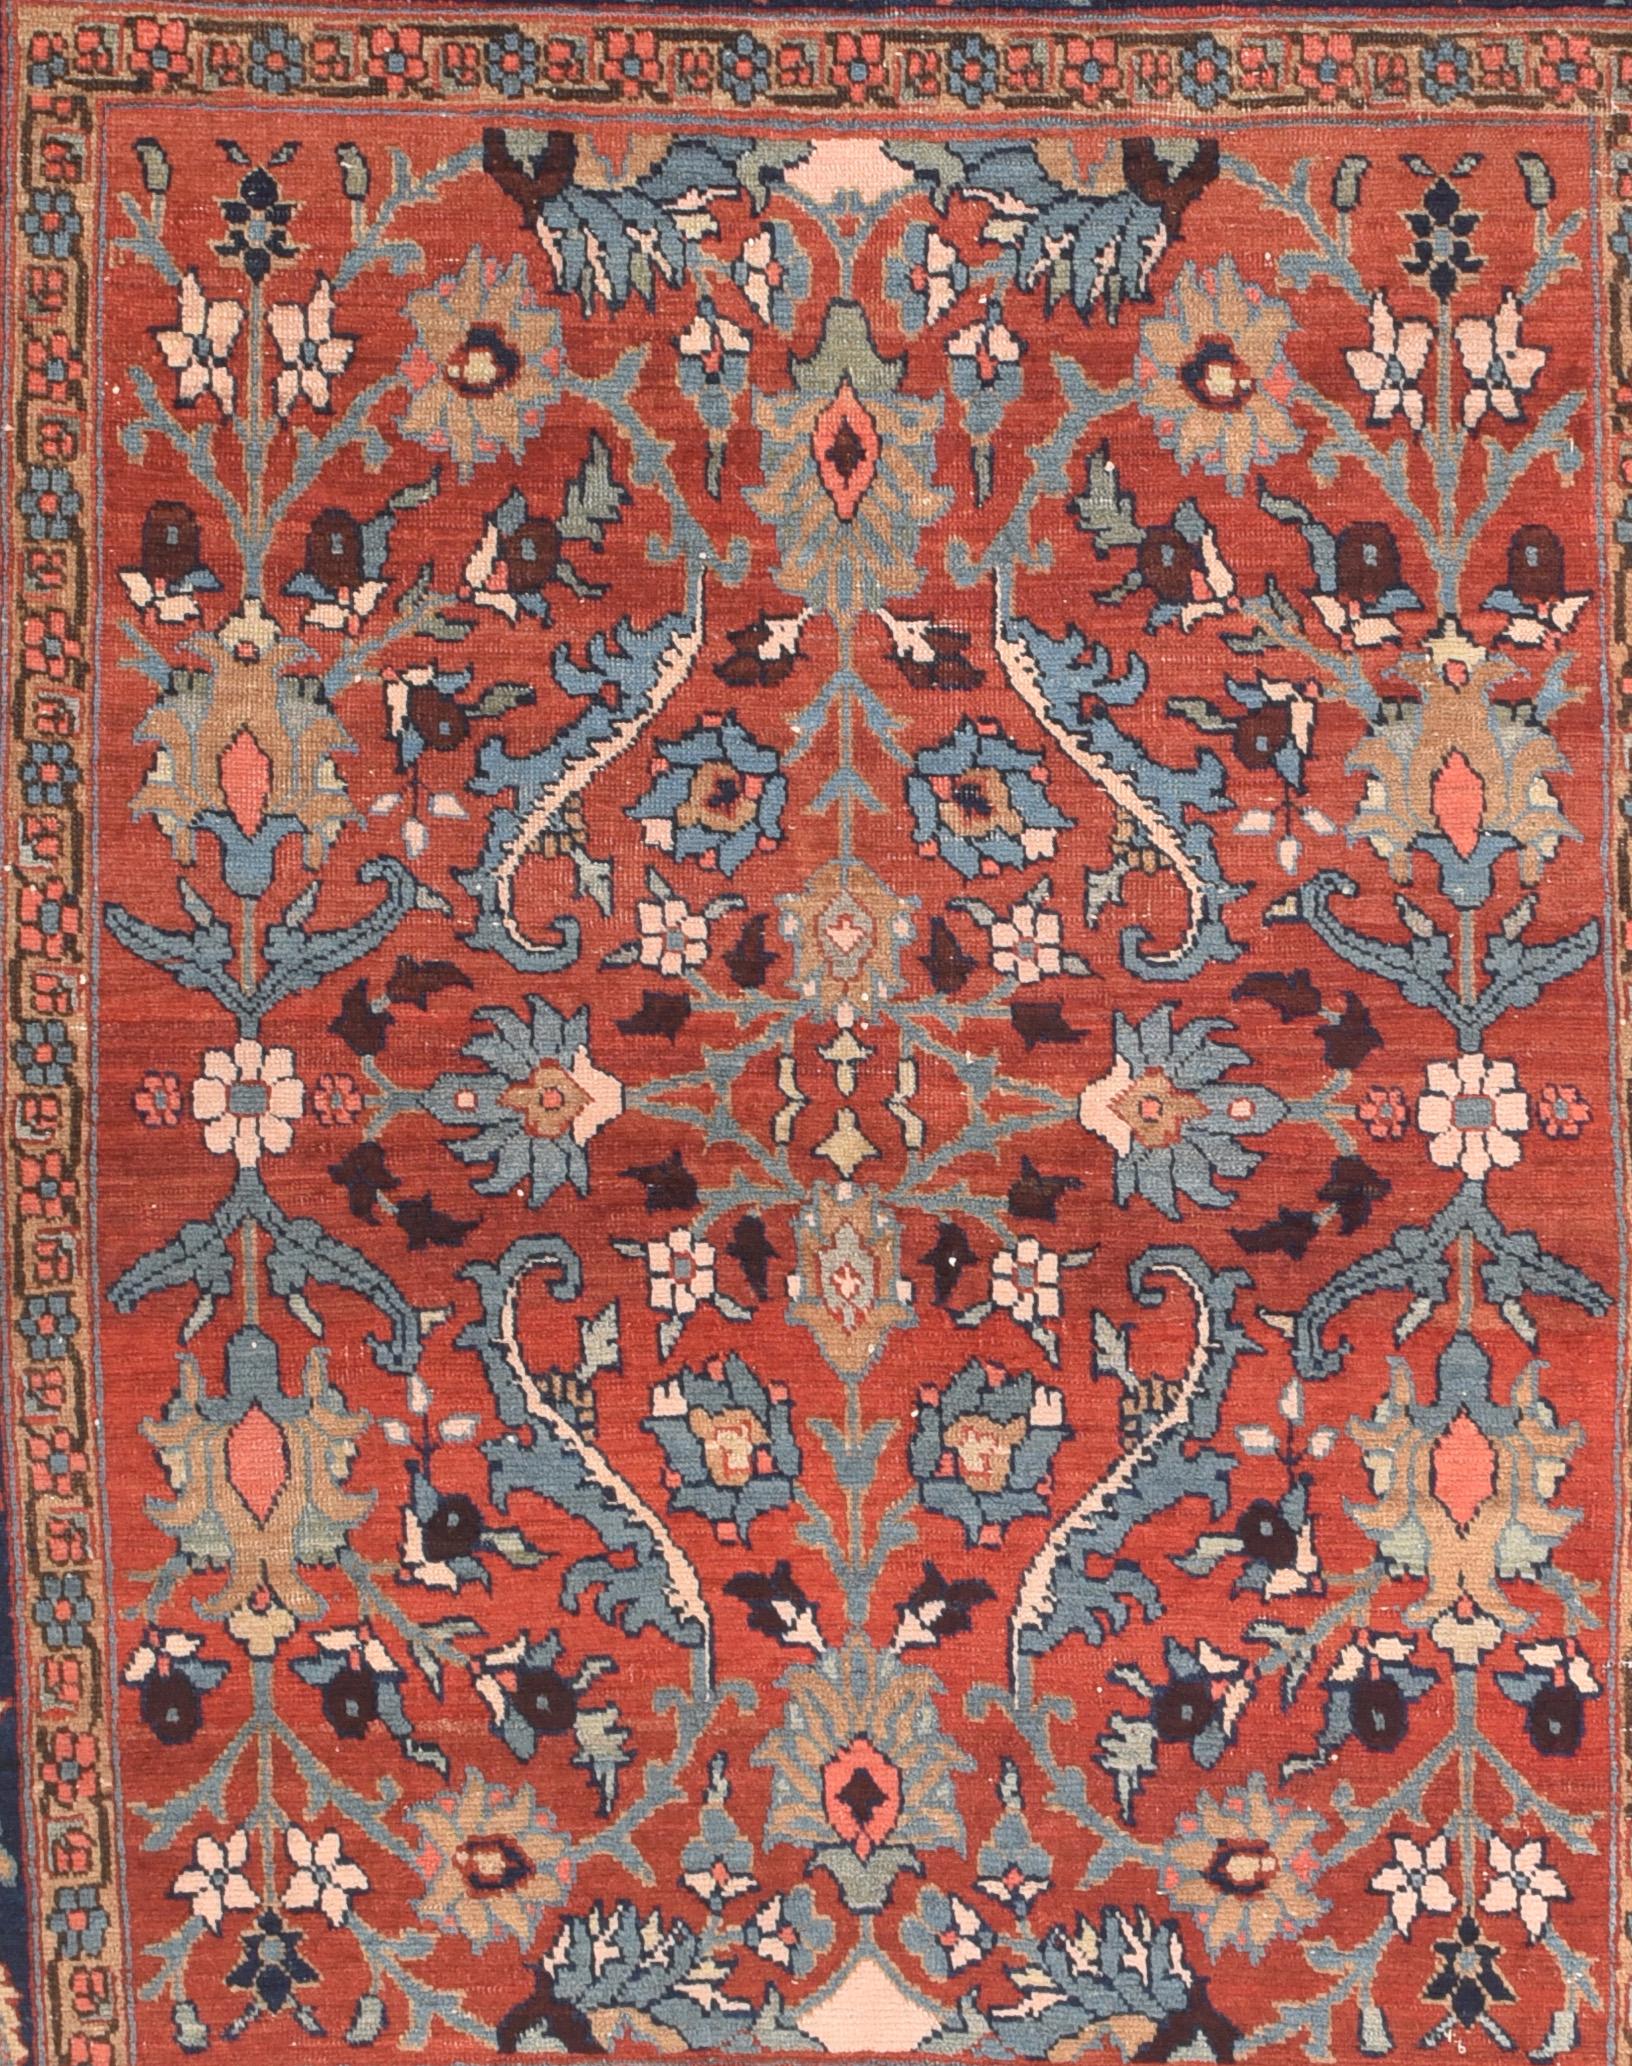 Fine antique Heriz Persian rug, hand knotted, circa 1890

Design: Floral

Heriz rugs are Persian rugs from the area of Heris, East Azerbaijan in northwest Iran, northeast of Tabriz. Such rugs are produced in the village of the same name in the